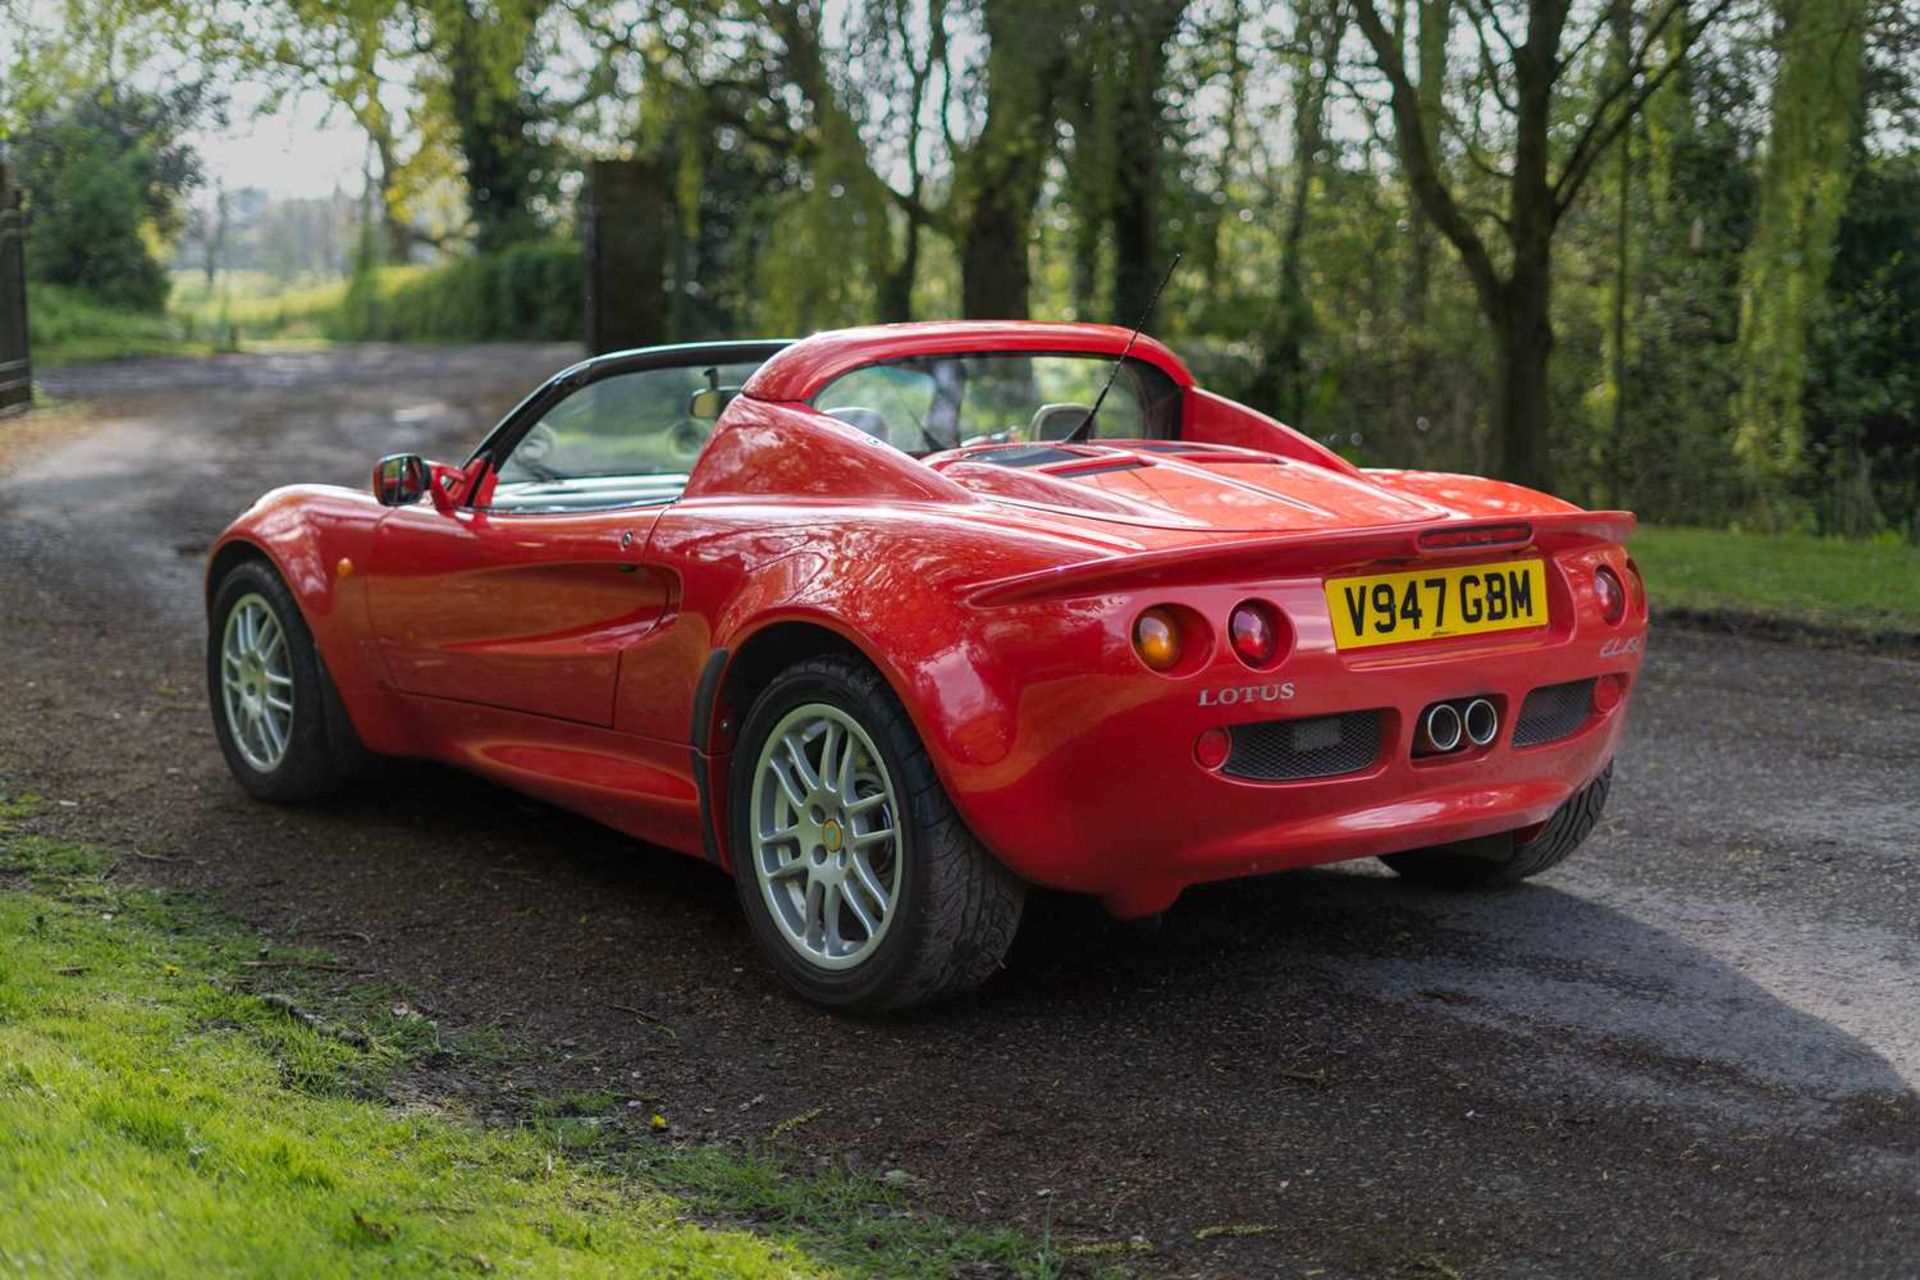 1999 Lotus Elise S1 Only 39,000 miles from new - Image 16 of 57